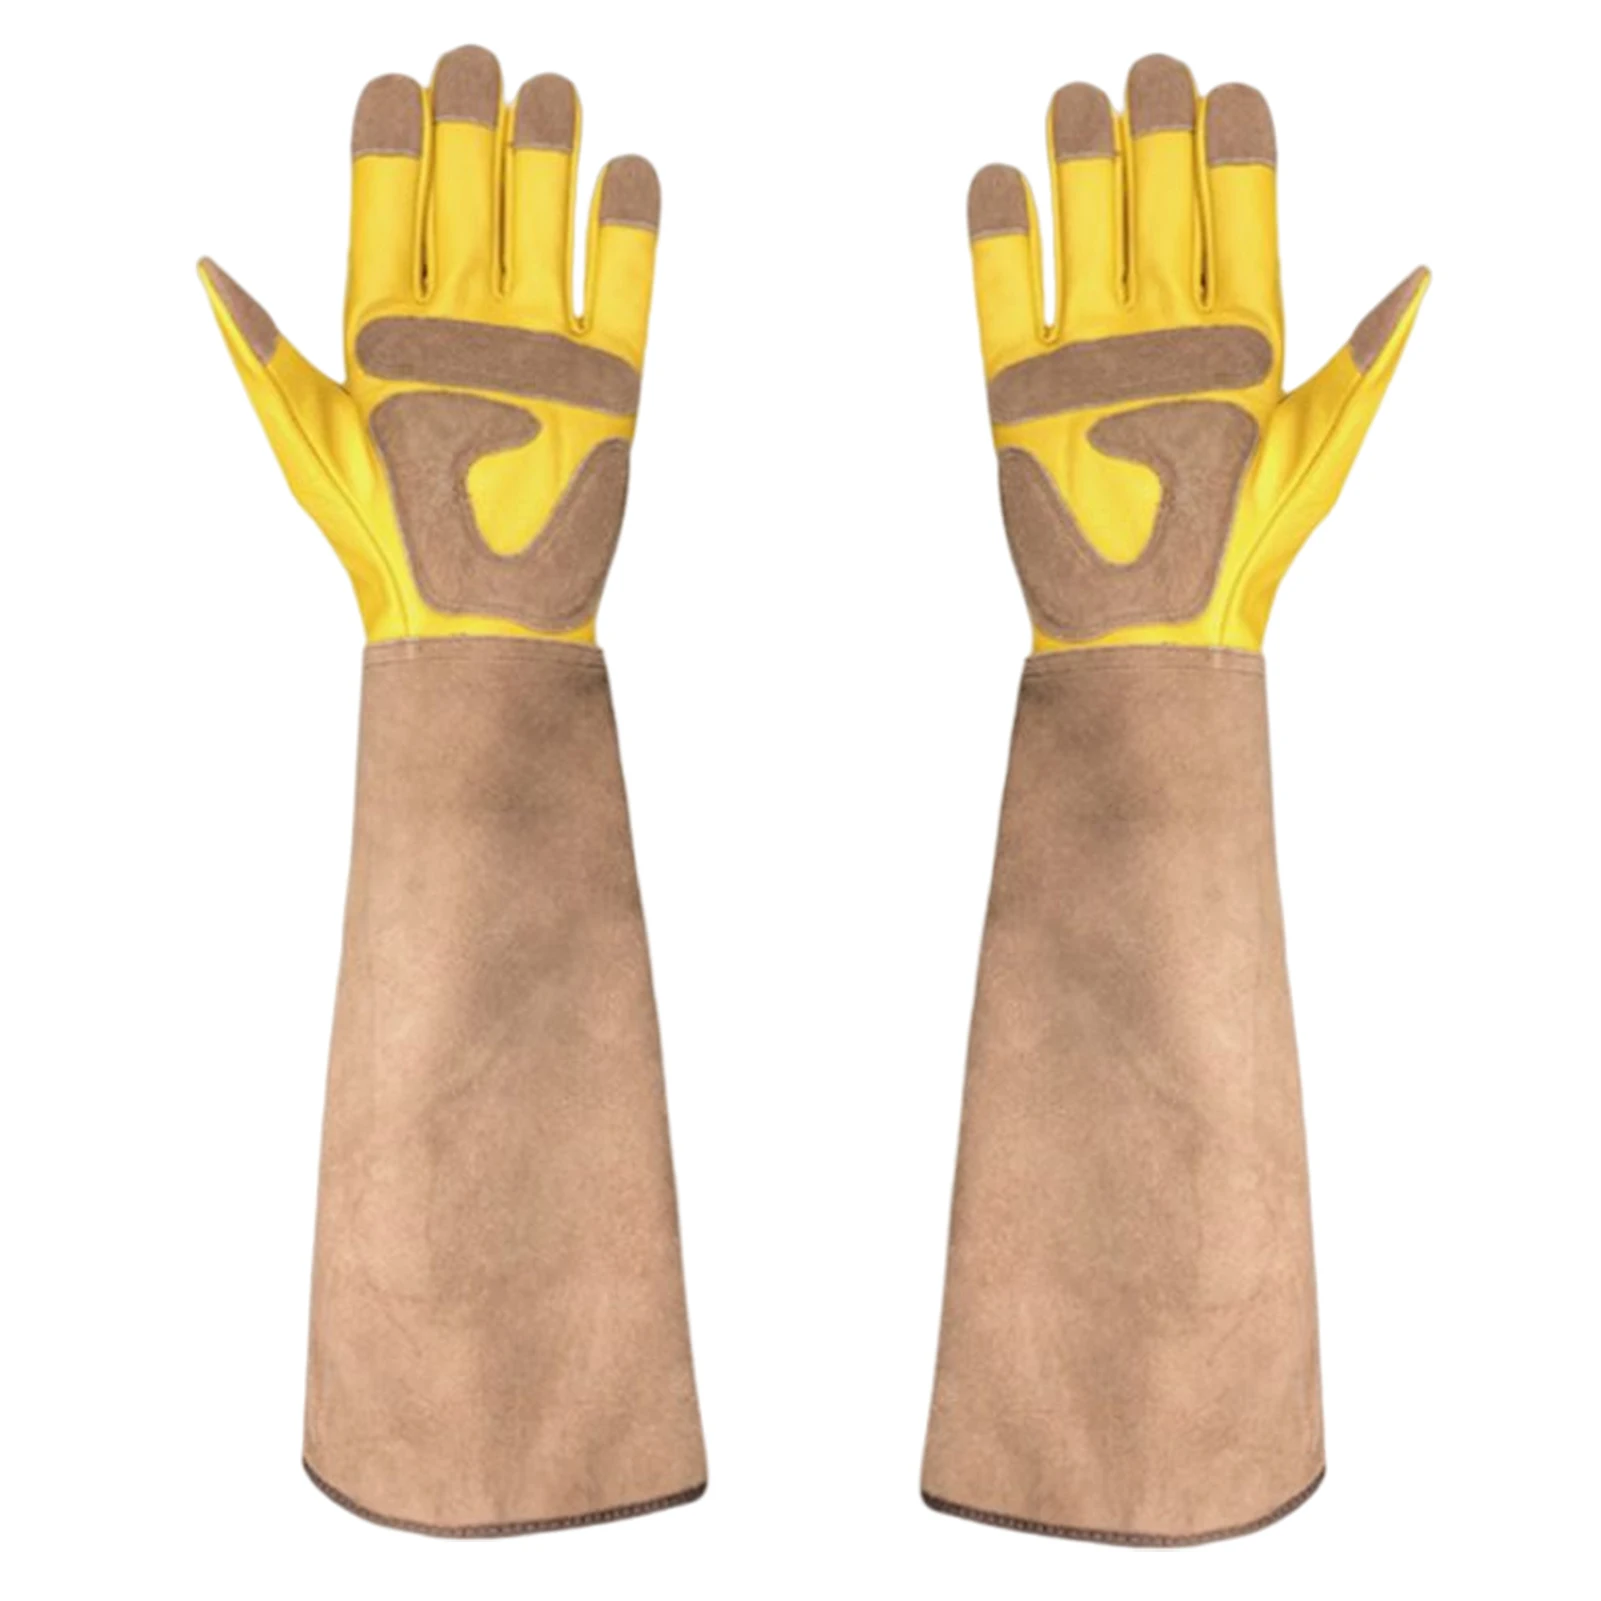 

Durable Heavy Duty Artificial Cowhide Rose Pruning Soft Long Sleeves Mechanic Cactus Shock Absorption Garden Gloves Thorn Proof